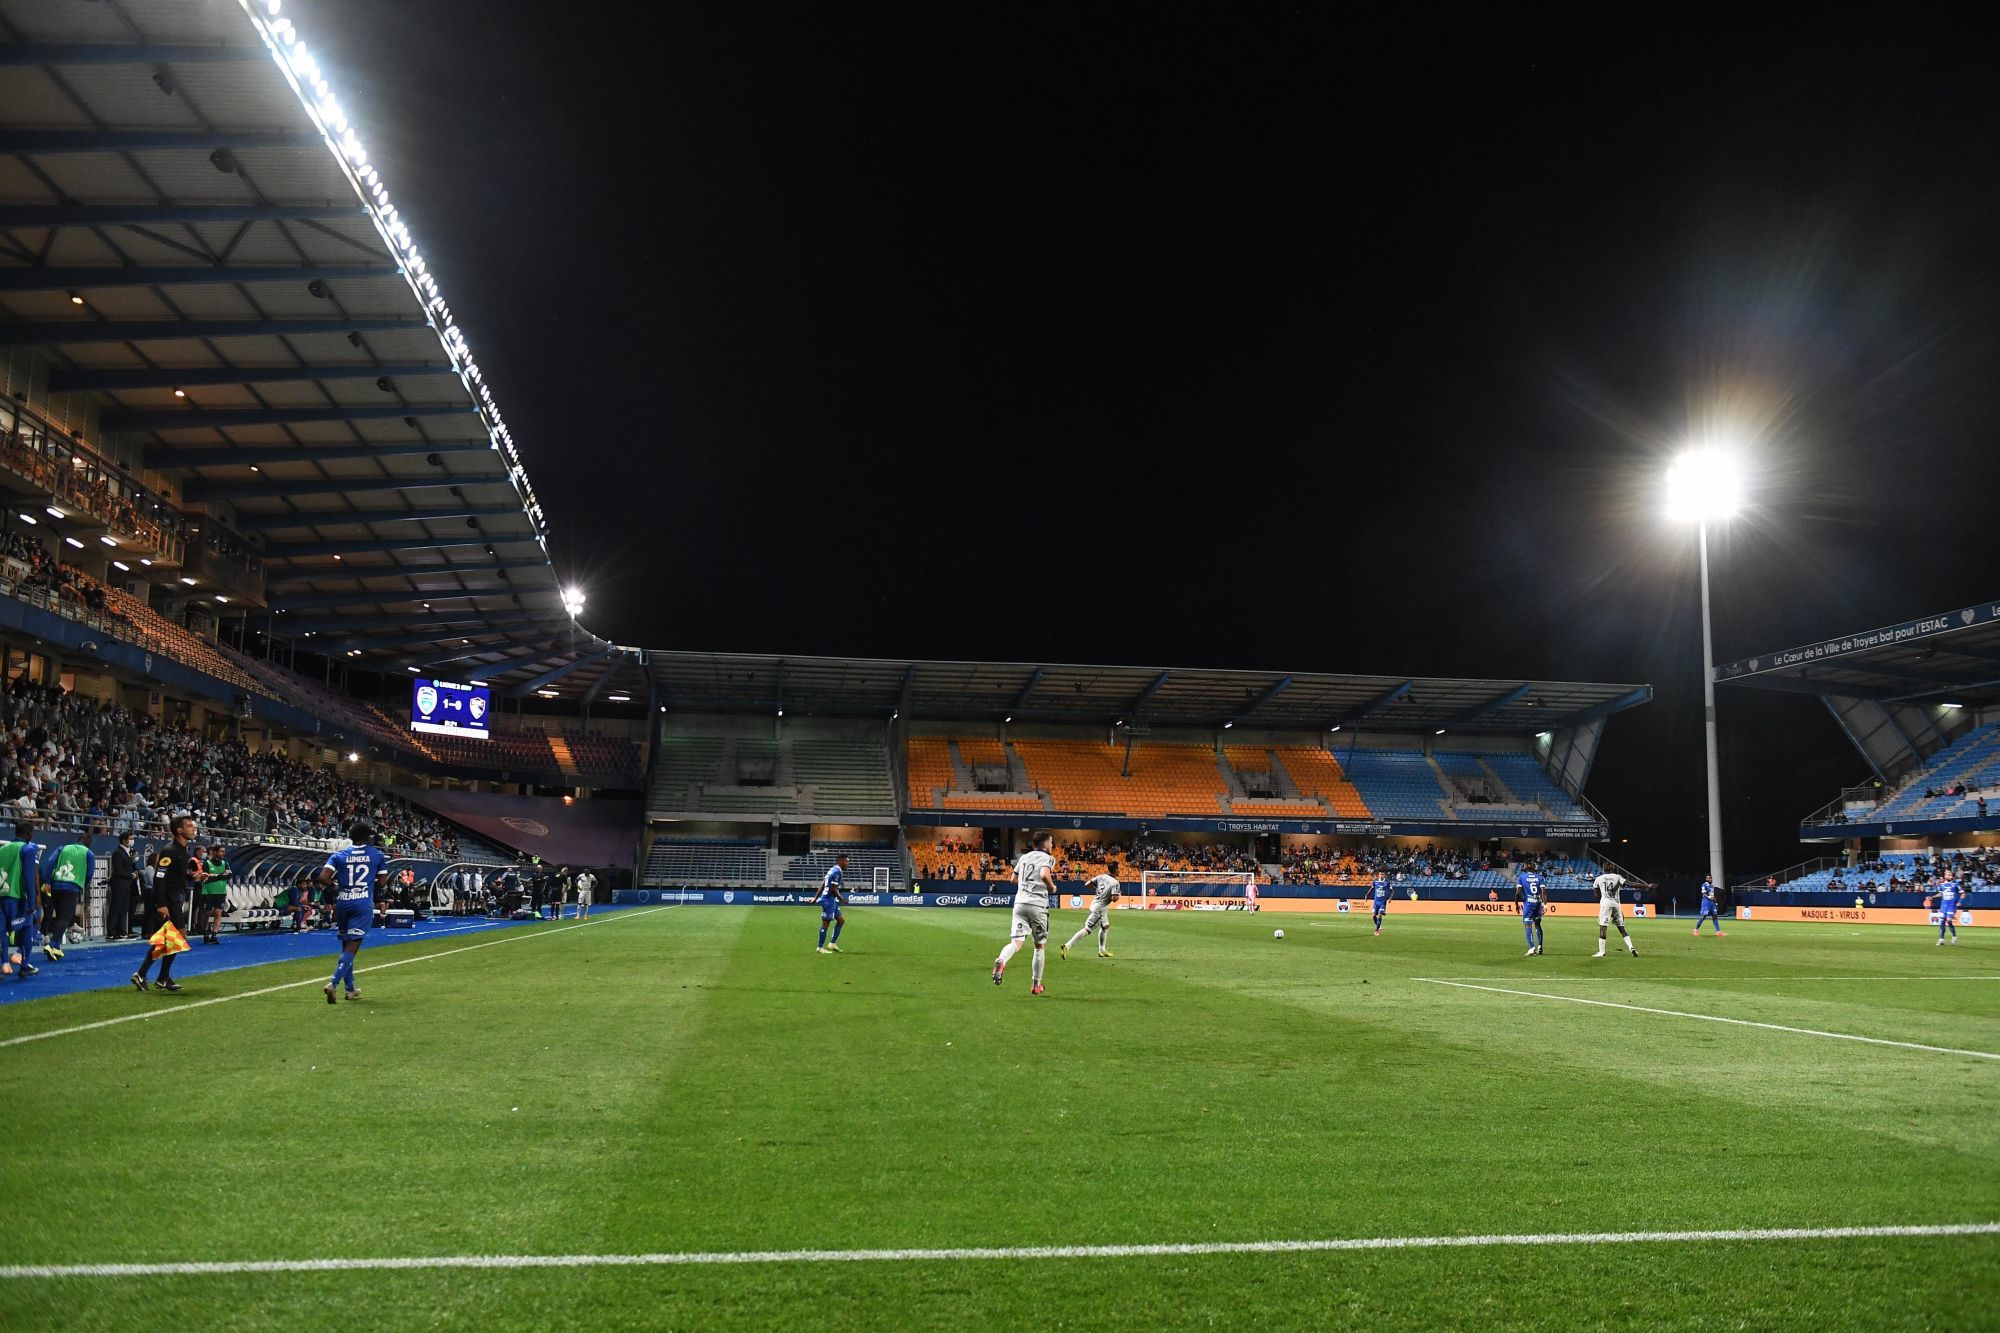 General view of the stadium during the Ligue 2 match between Troyes and Le Havre on August 24, 2020 in Troyes, France. (Photo by Anthony Dibon/Icon Sport) - --- - Stade de l'Aube - Troyes (France)